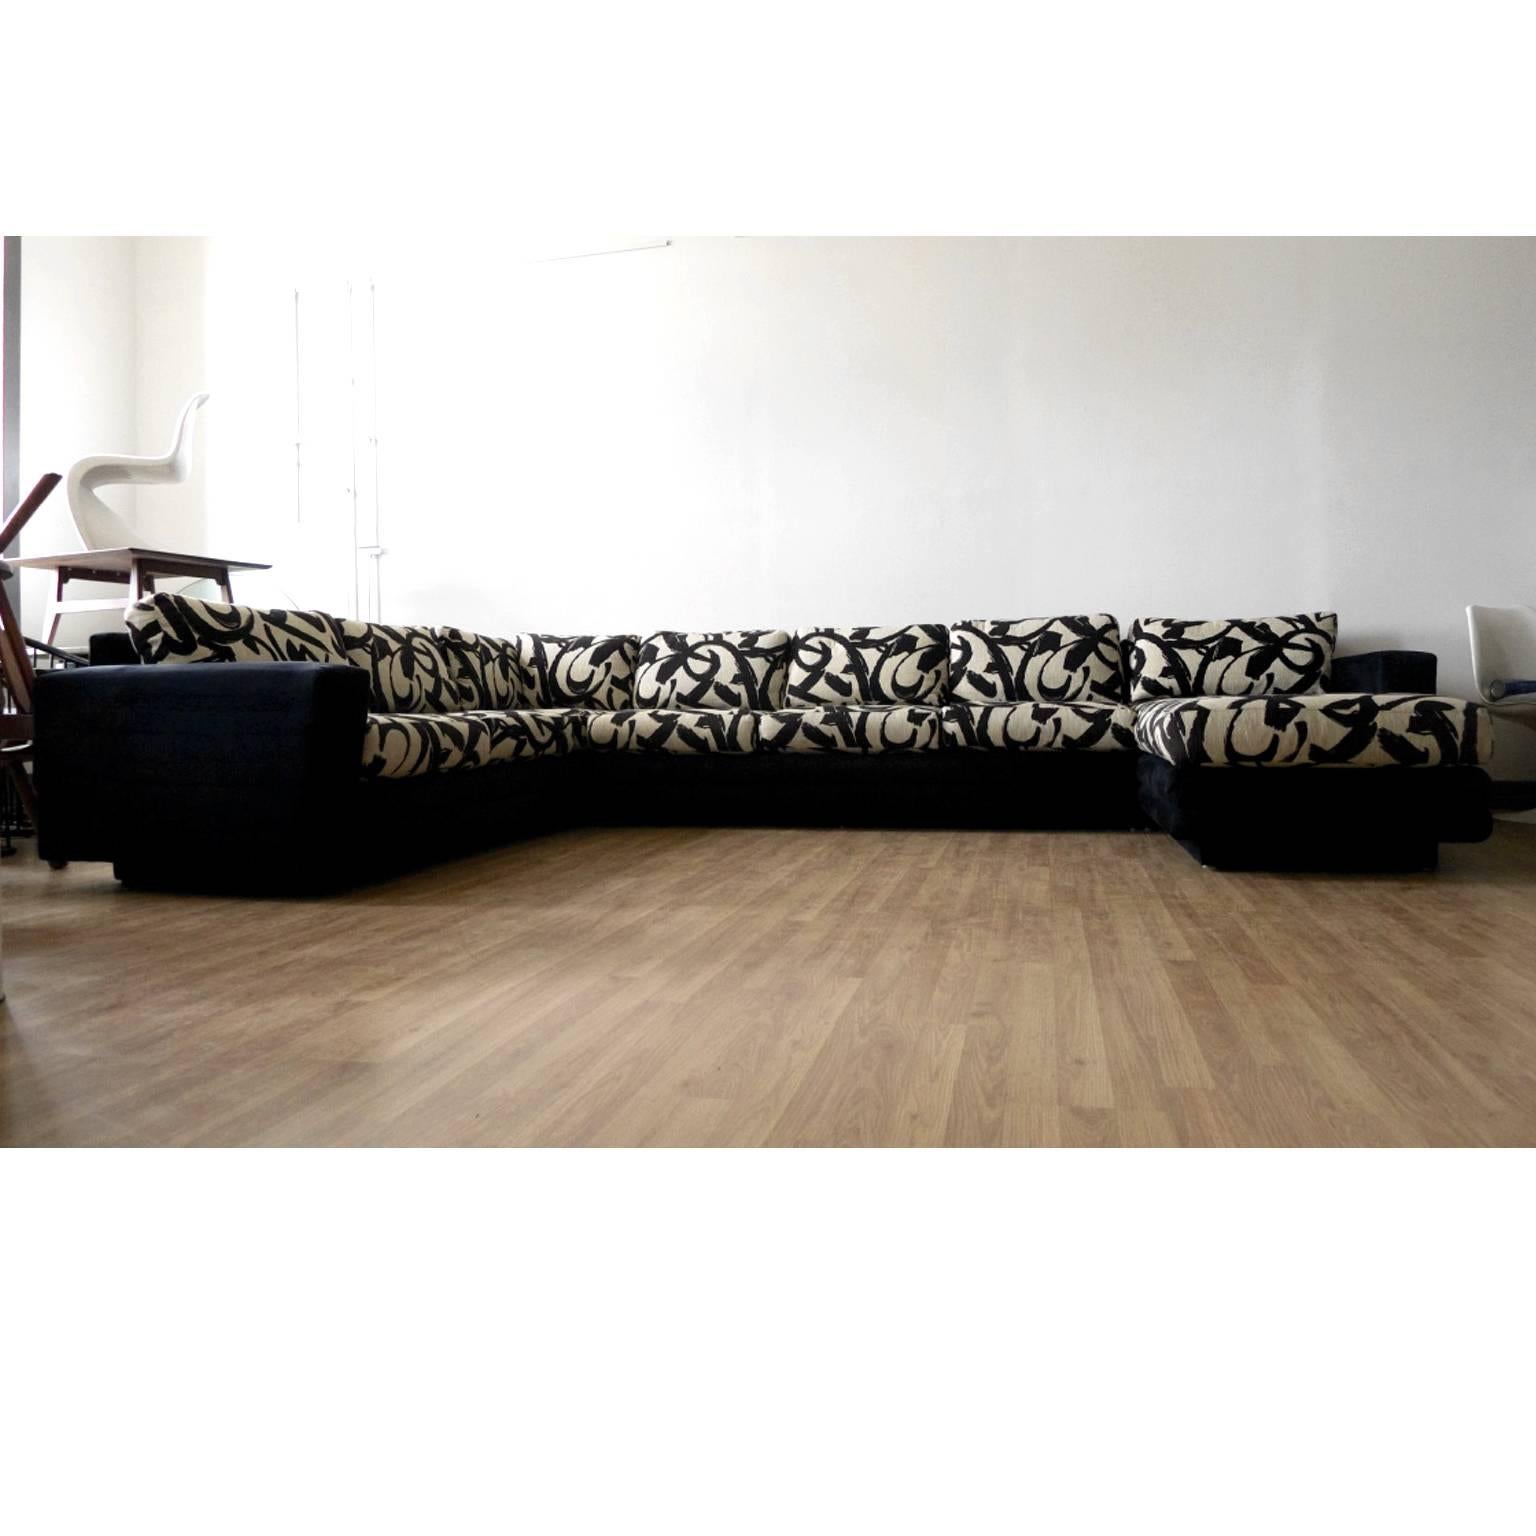 Monumental Directional Sectional Sofa with Modernist Abstract Op Art In Excellent Condition In Hudson, NY